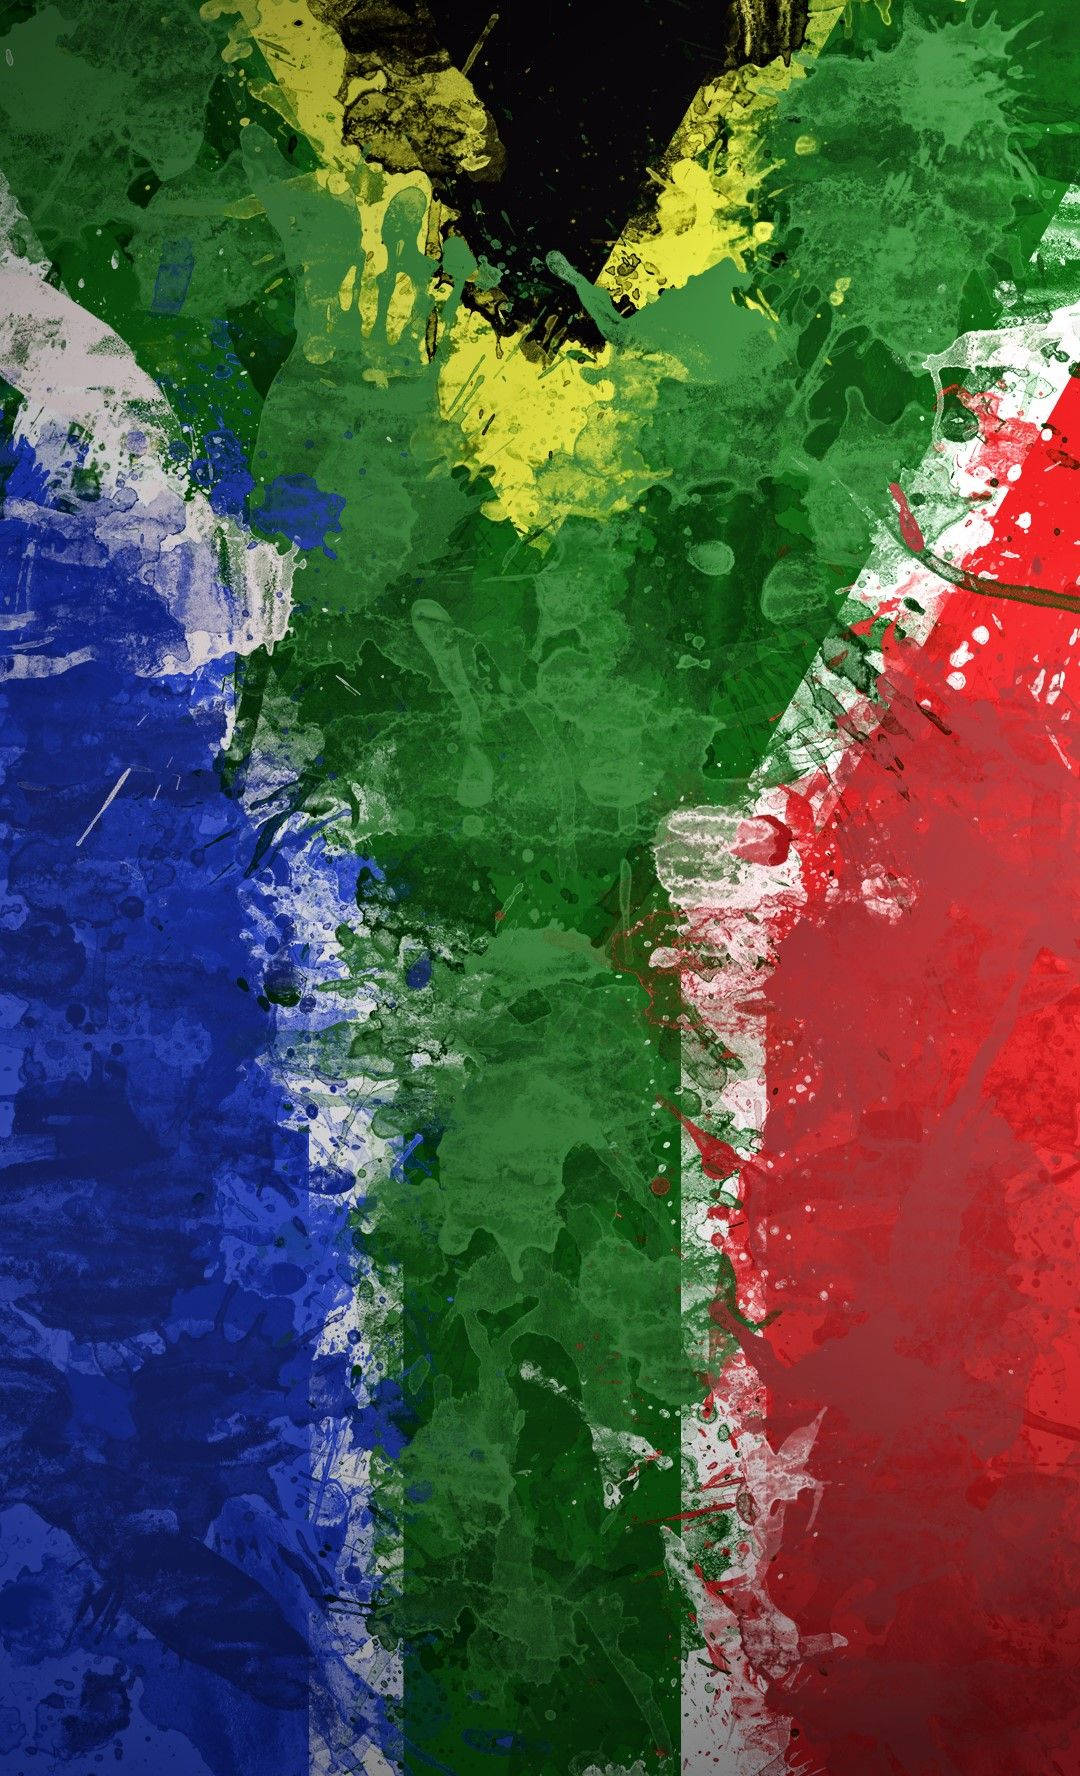 Painted Flag Africa Iphone Background